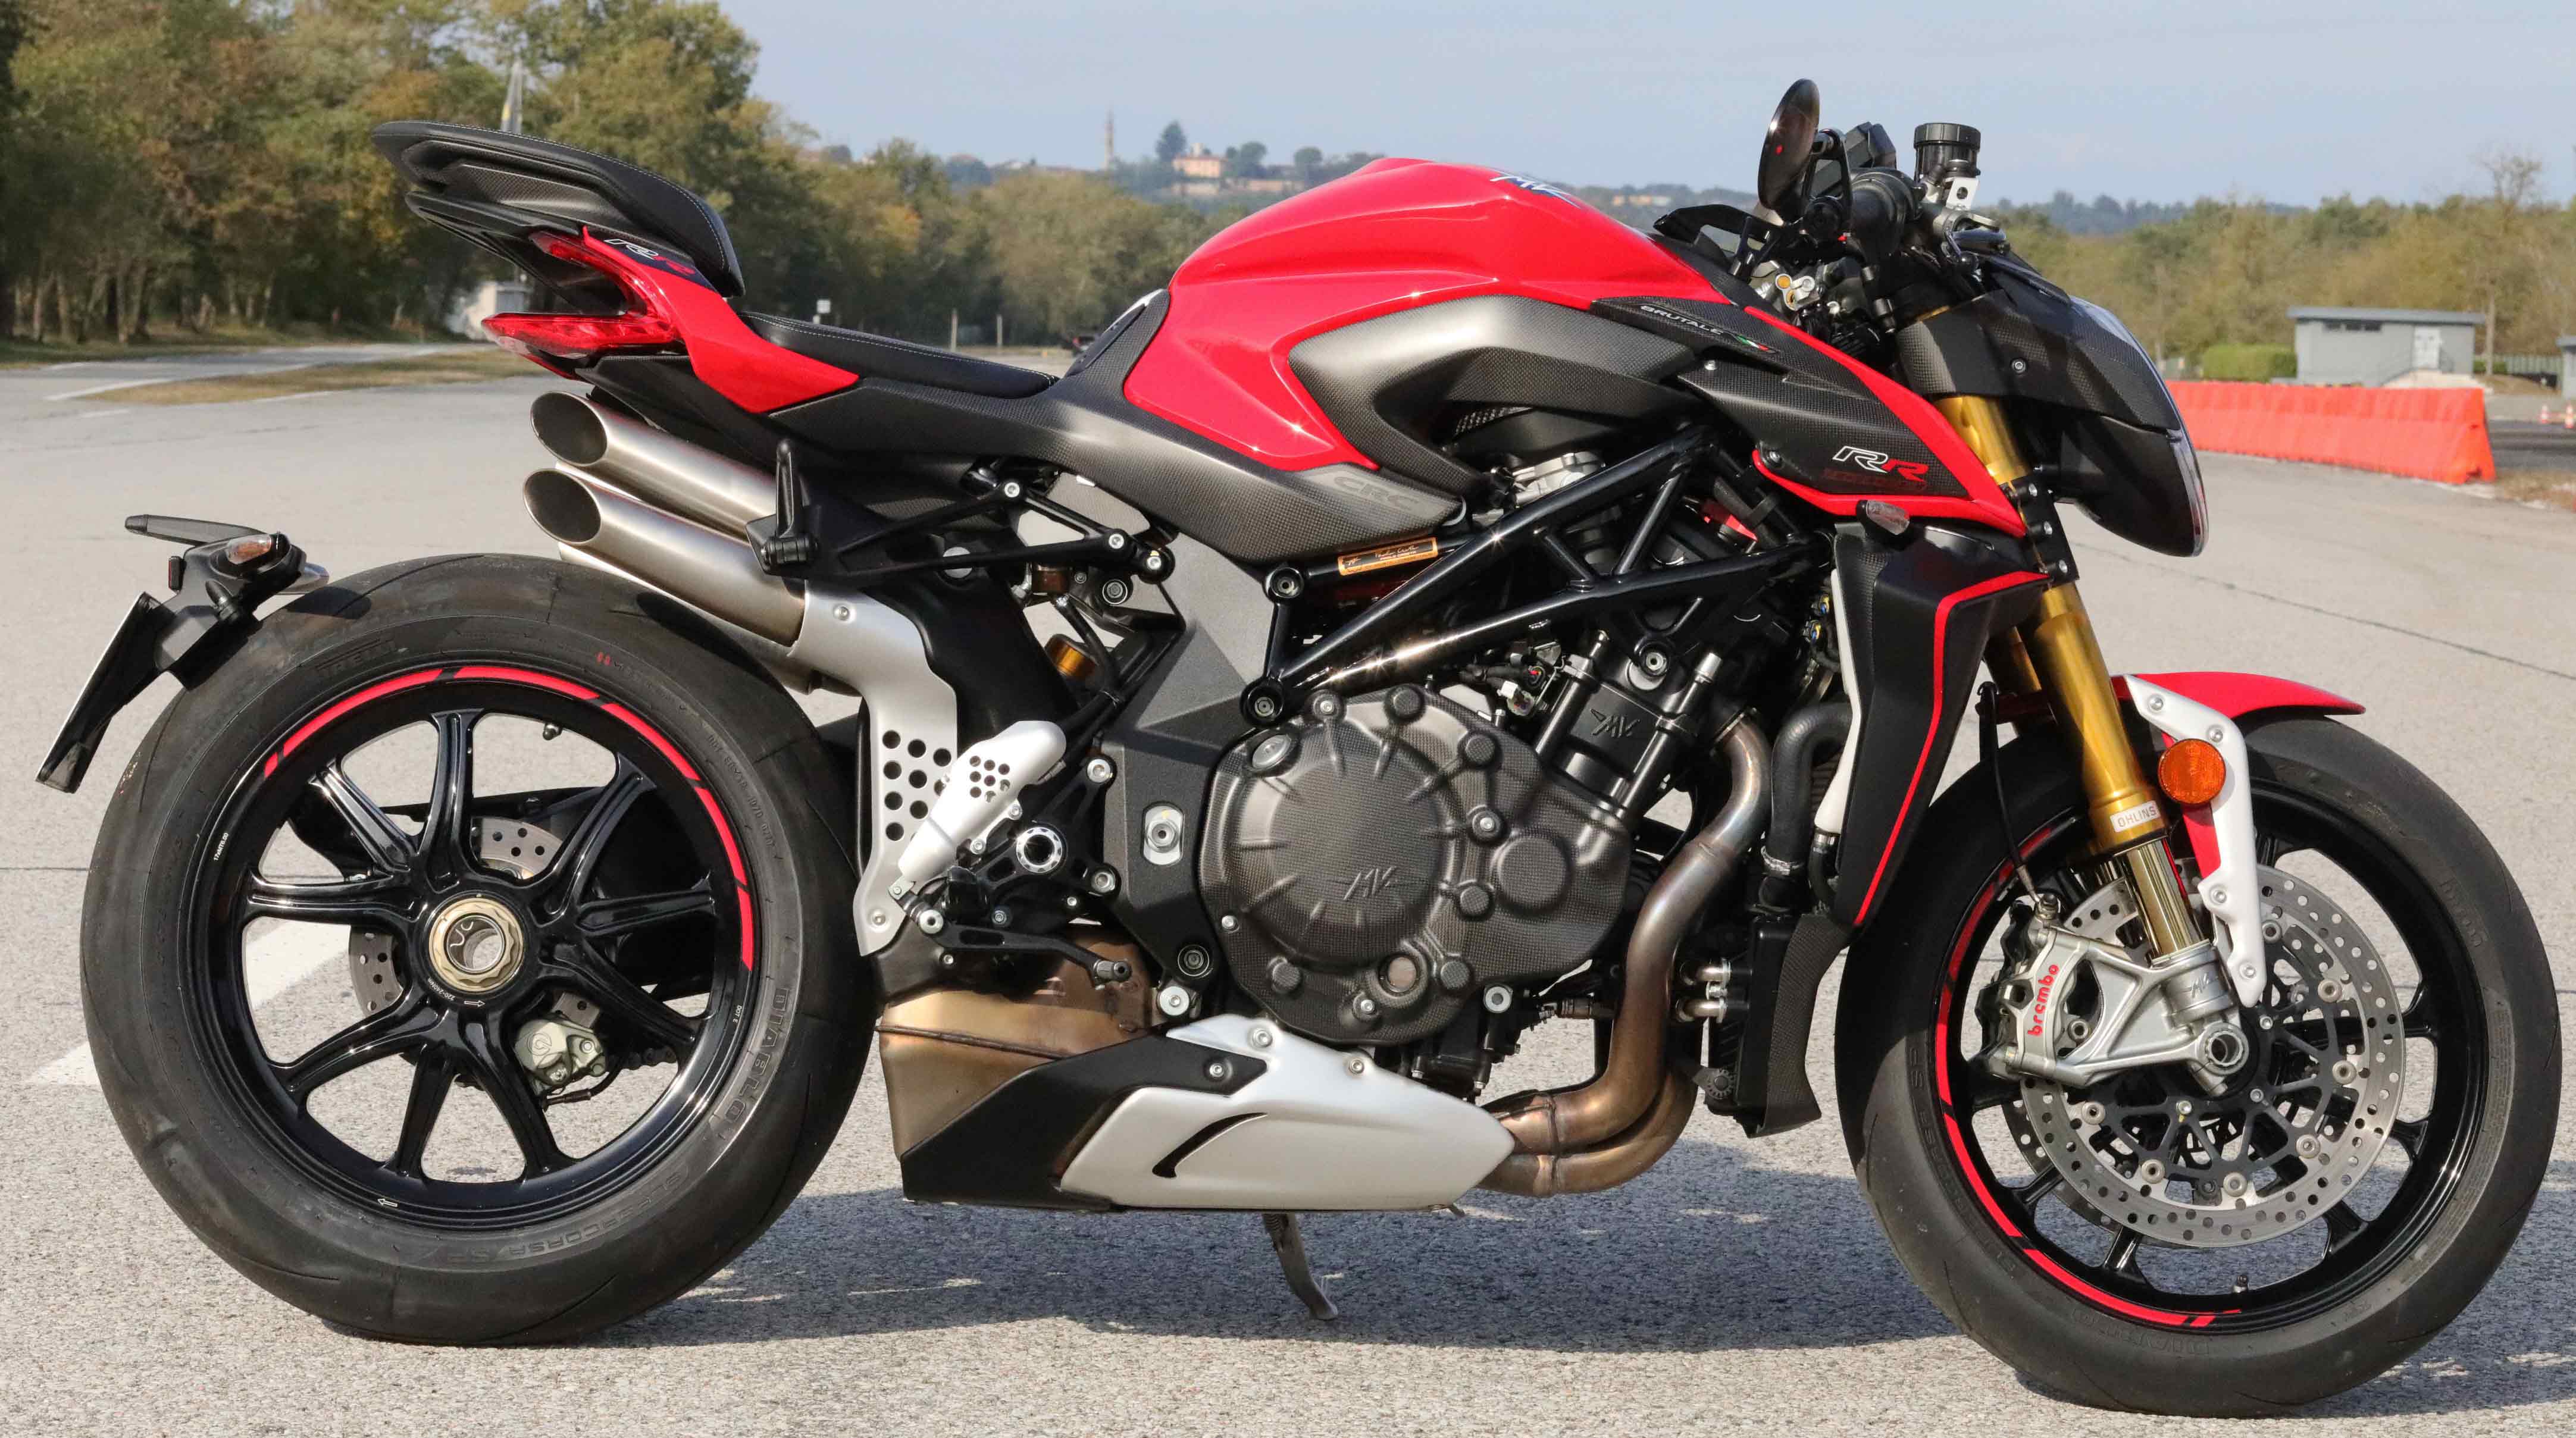 2020 MV Agusta Brutale 1000 RR First Look (11 Fast Facts)